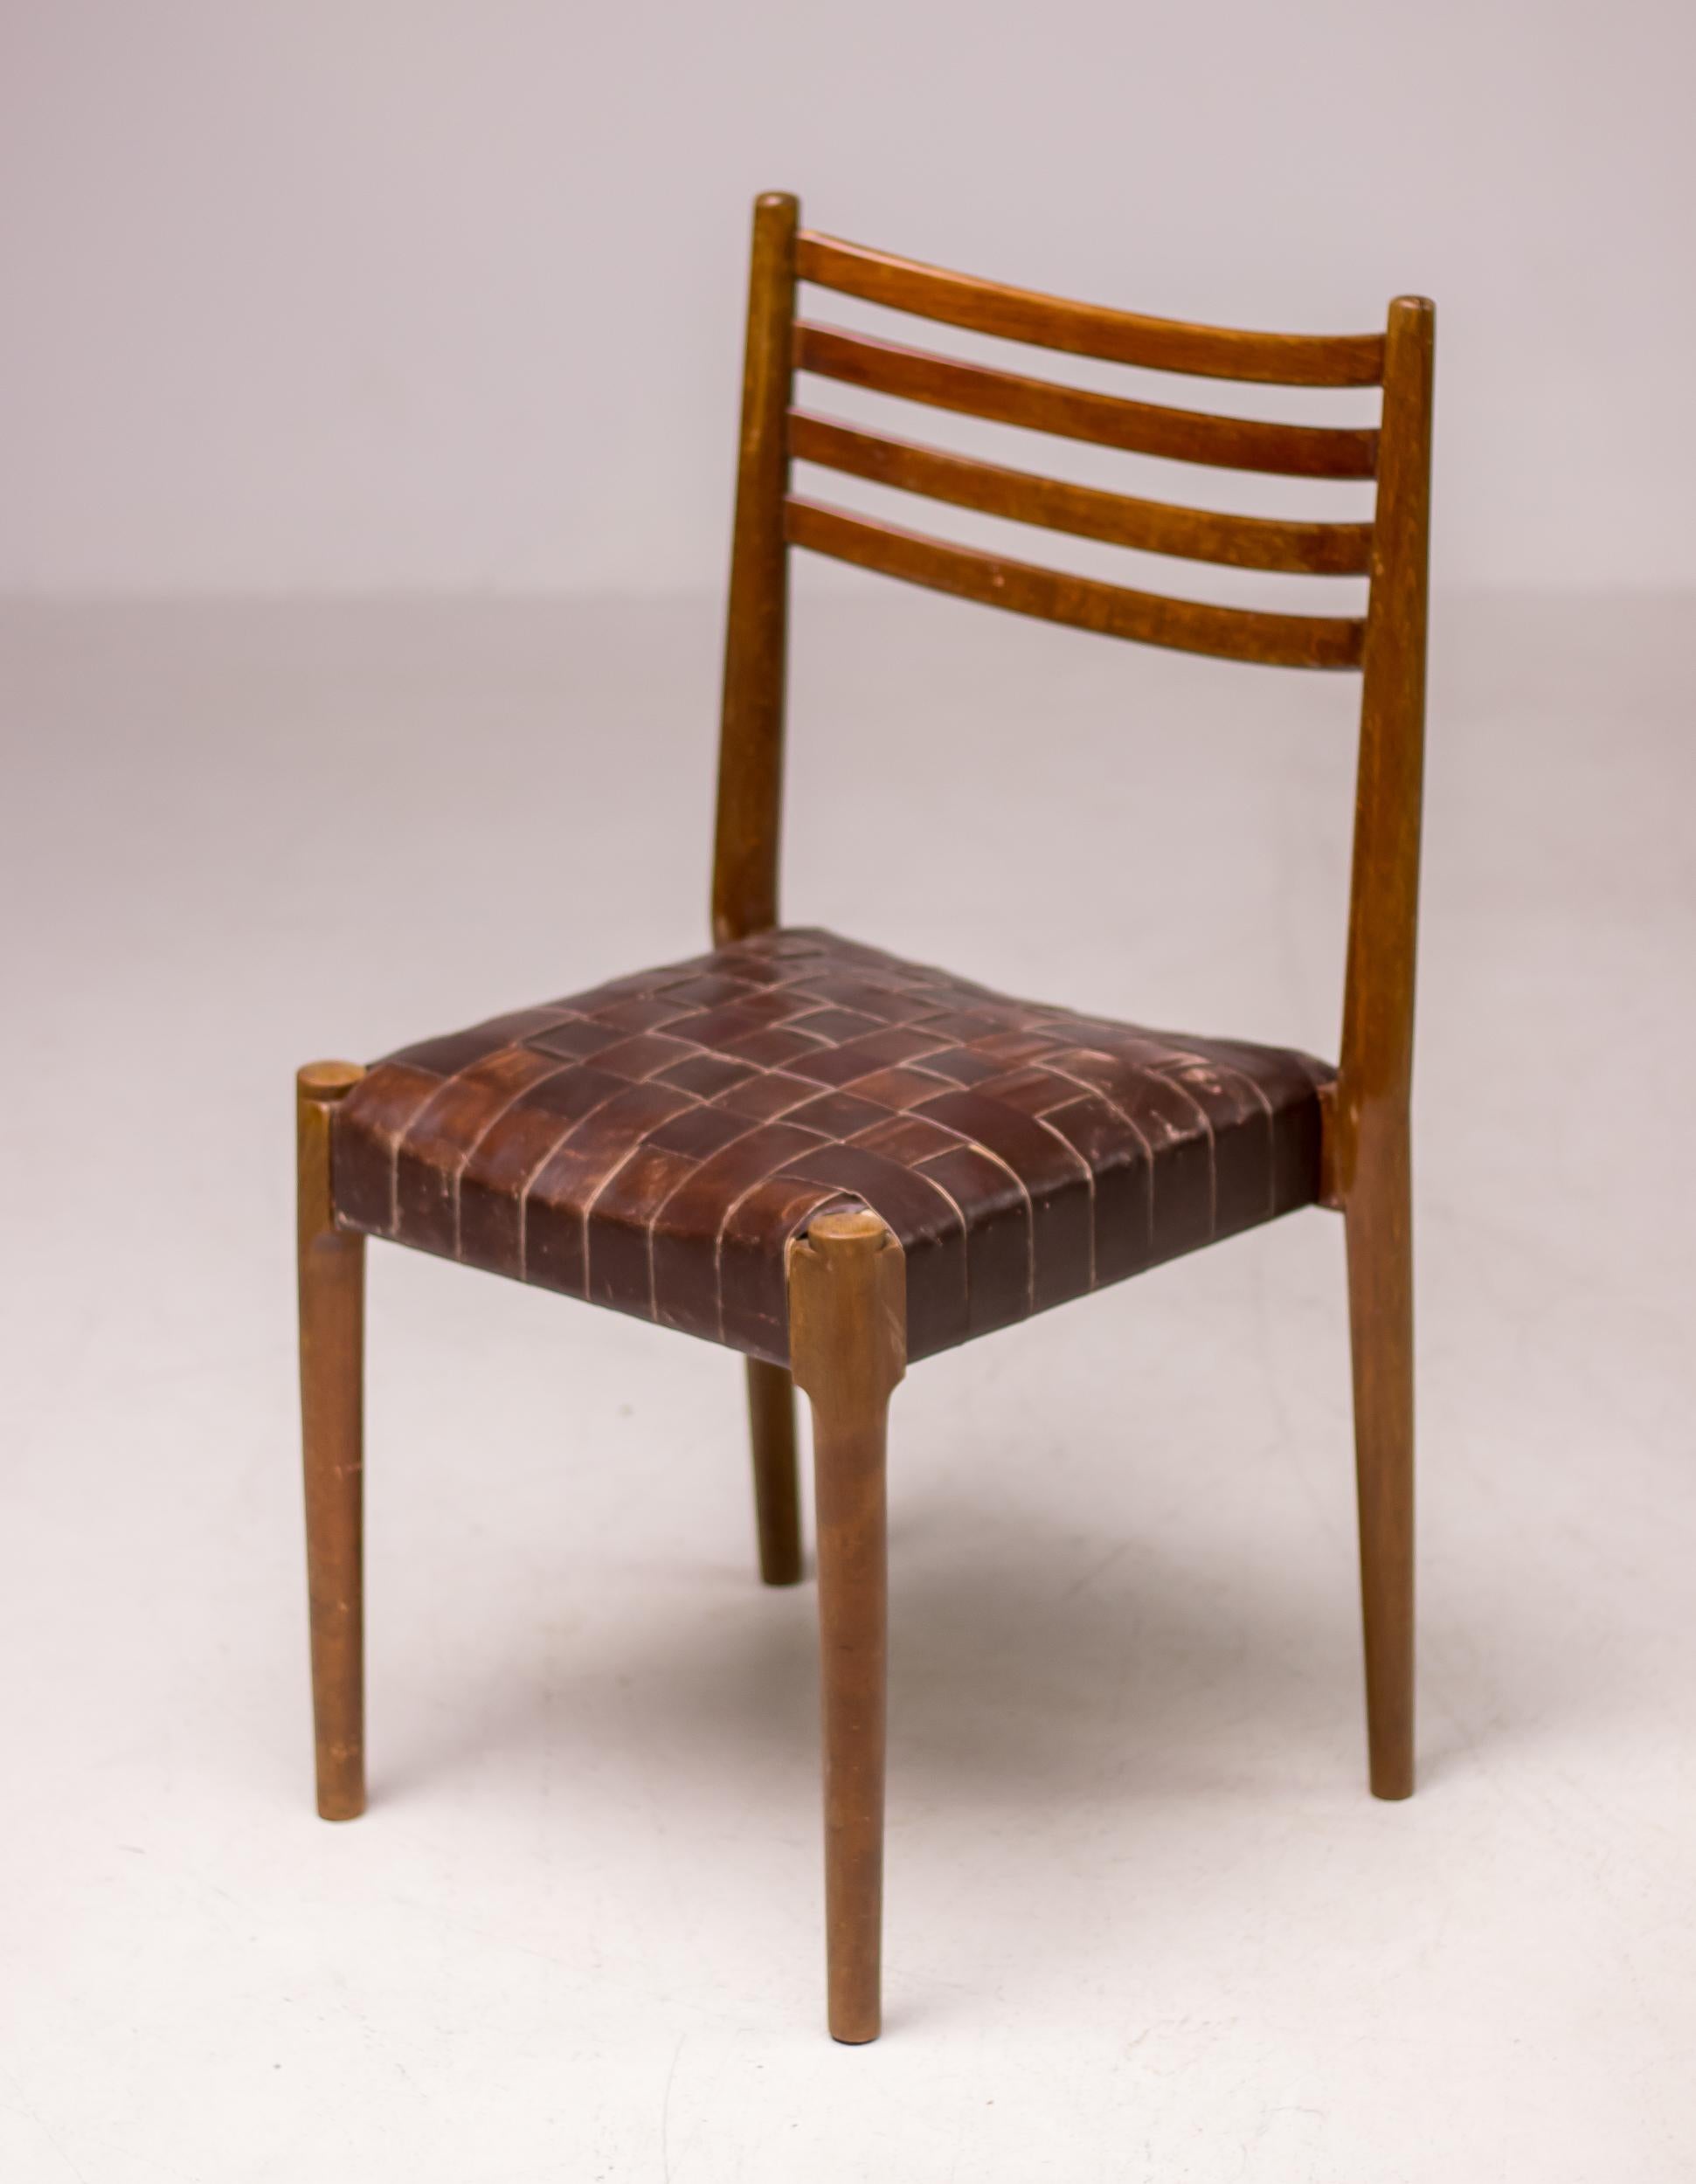 Stained Palle Suenson Chairs For Sale